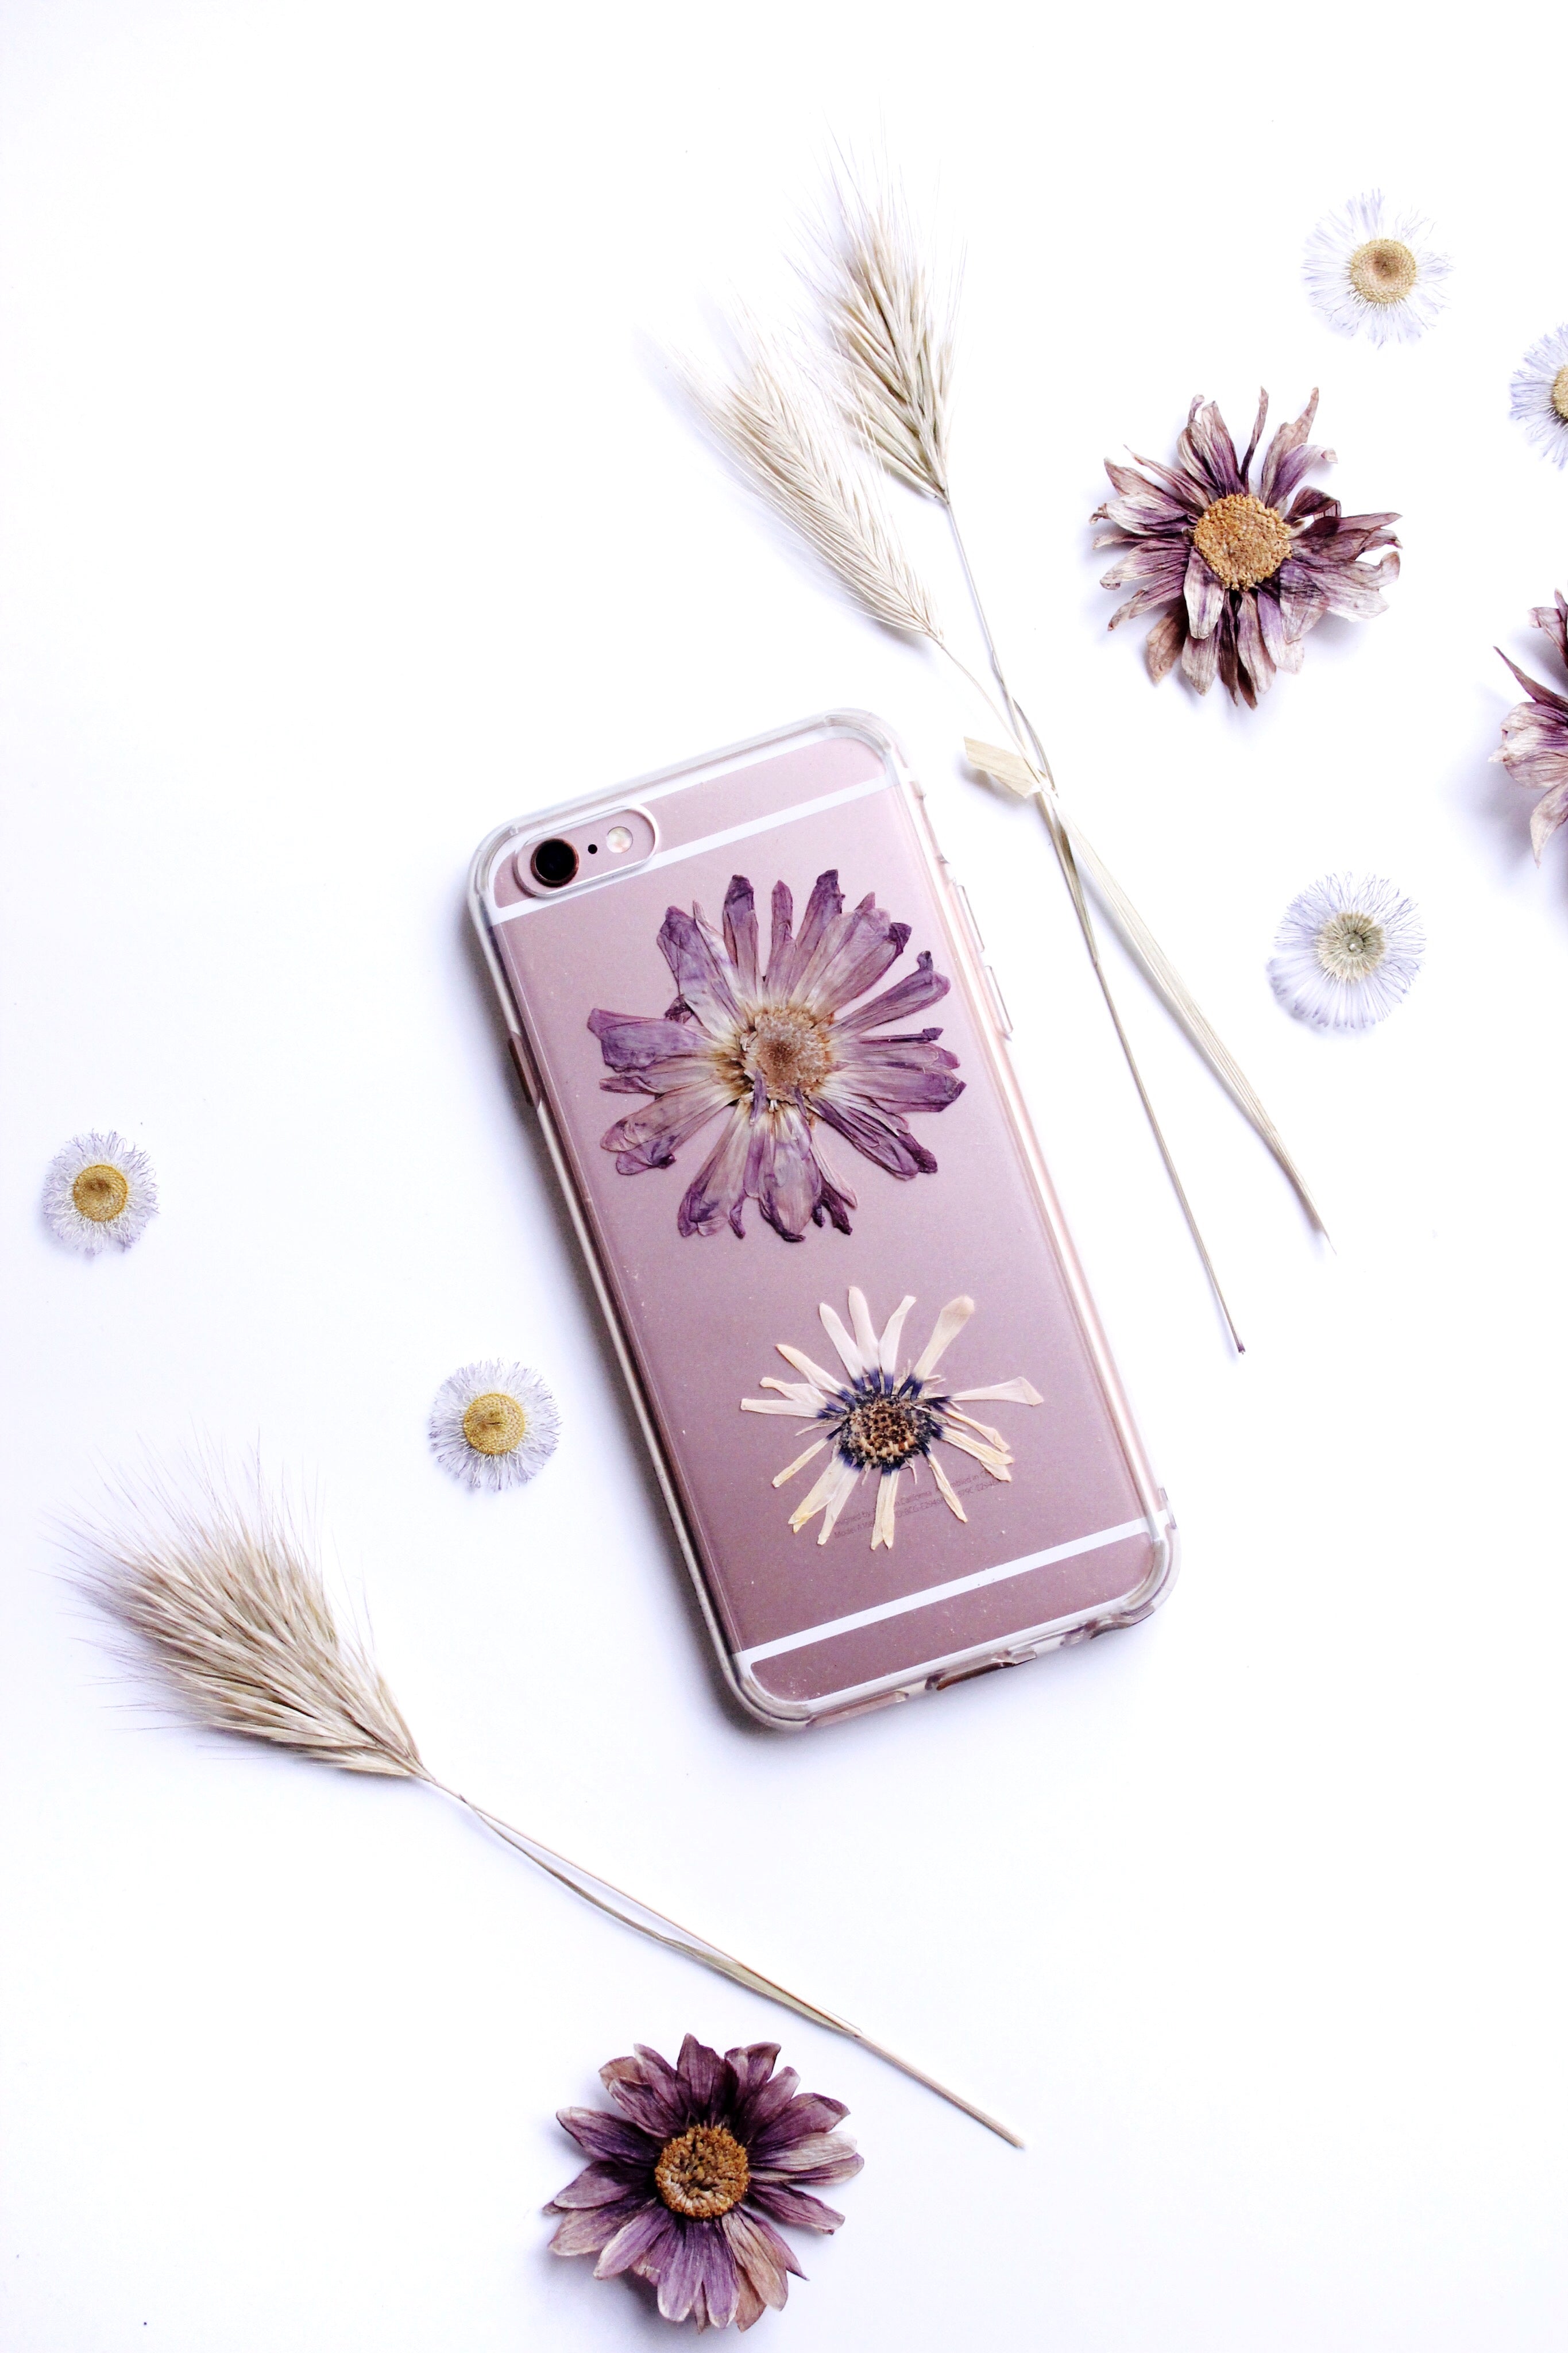 floral iphone case and flowers LOTUSWEI flower essences